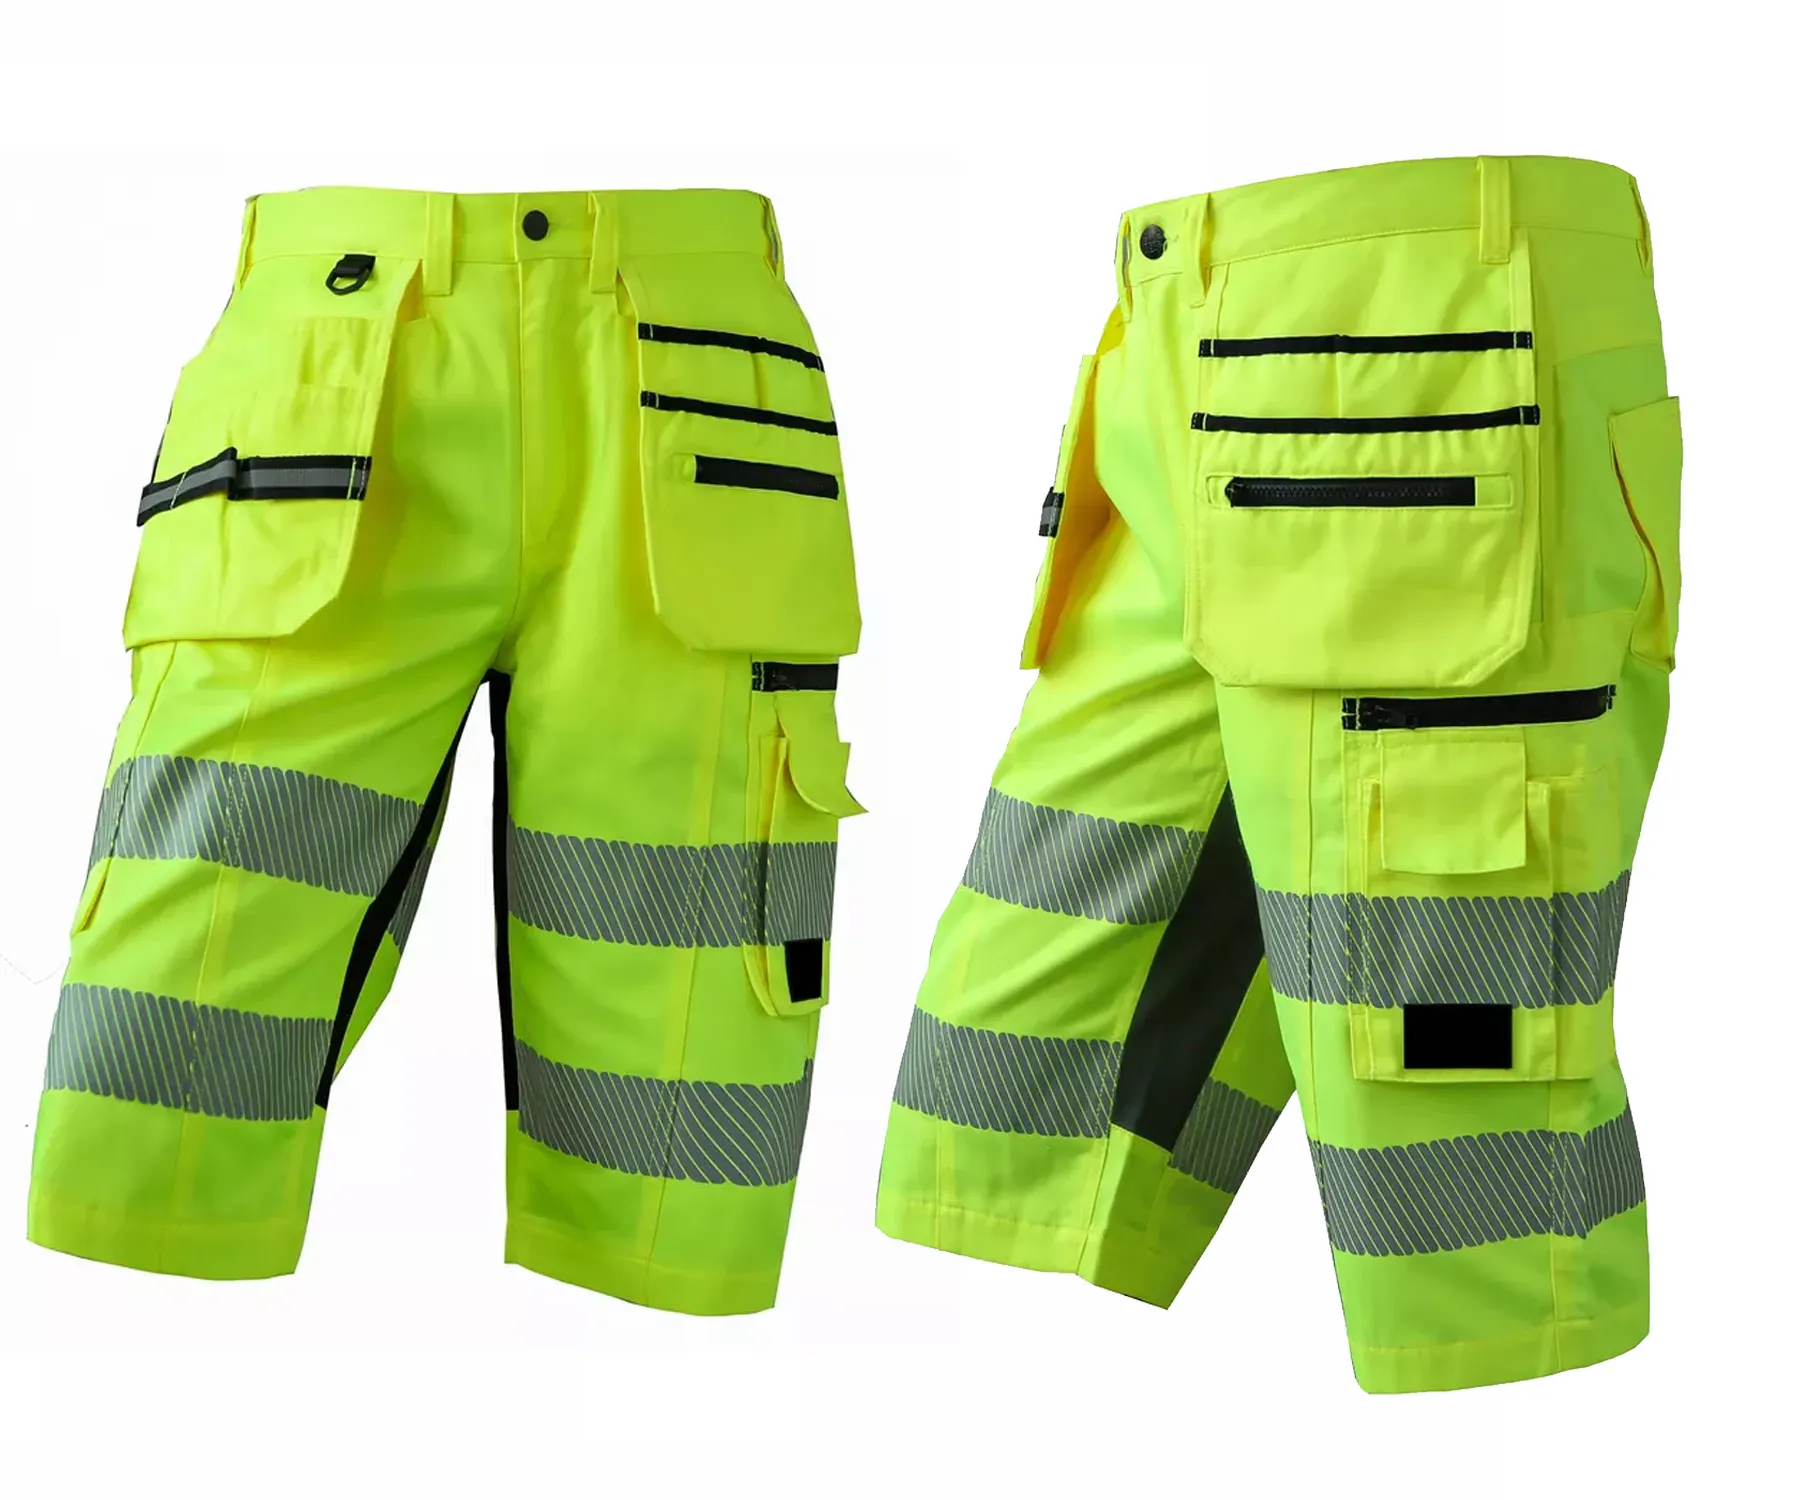 New Safety Work Wear 100% cotton Short Pants With Reflective Tape Made by Antom Enterprises